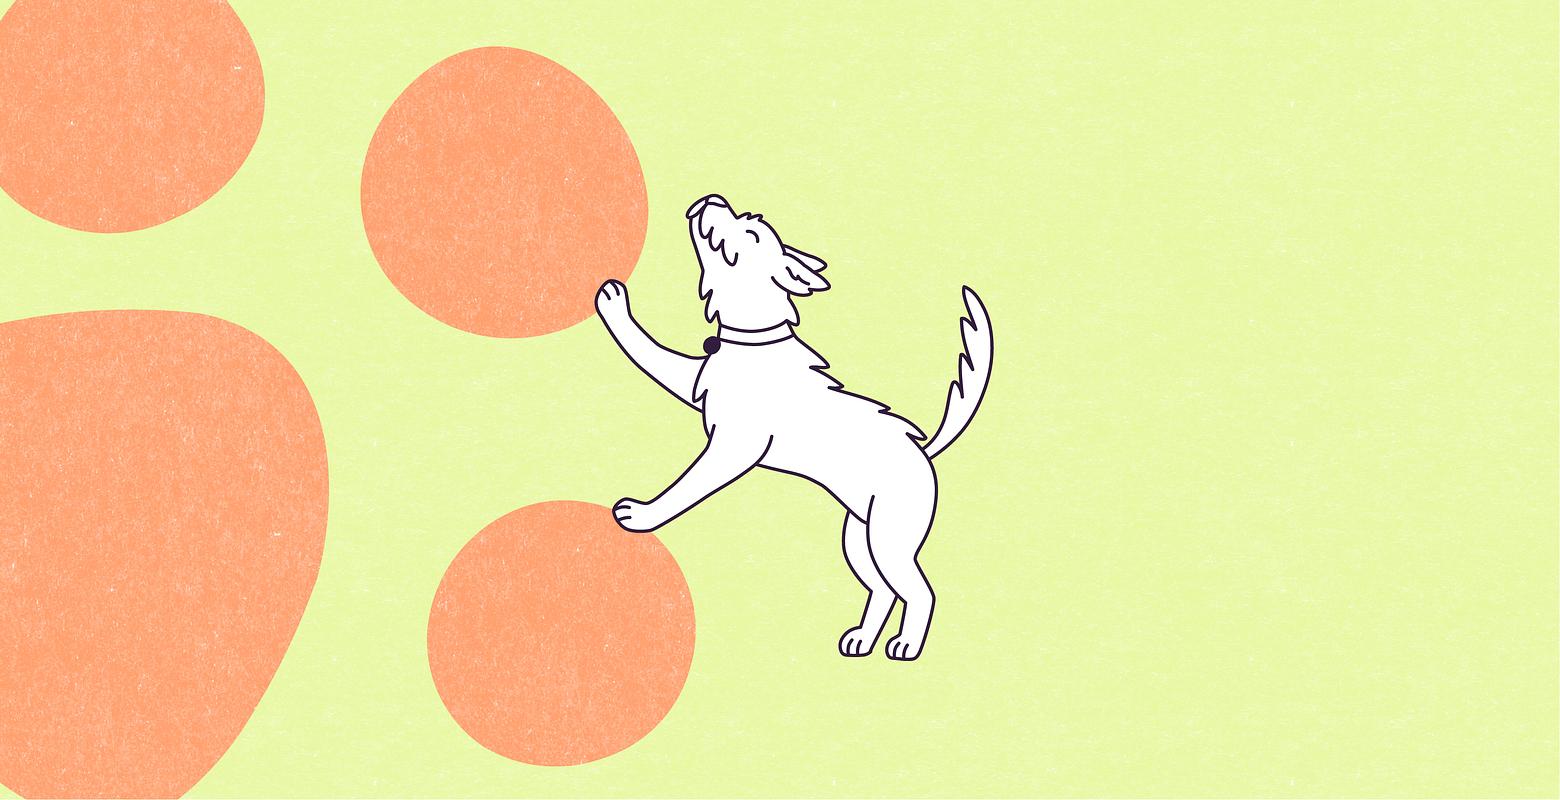 A vector illustration on a large light mystic green, paper-textured rectangle, of Clover, a medium white mutt dog with long, spiky, white fur and short, upright ears, joyfully interacting with a large paper-textured atomic tangerine paw shape, on the left of the rectangle.